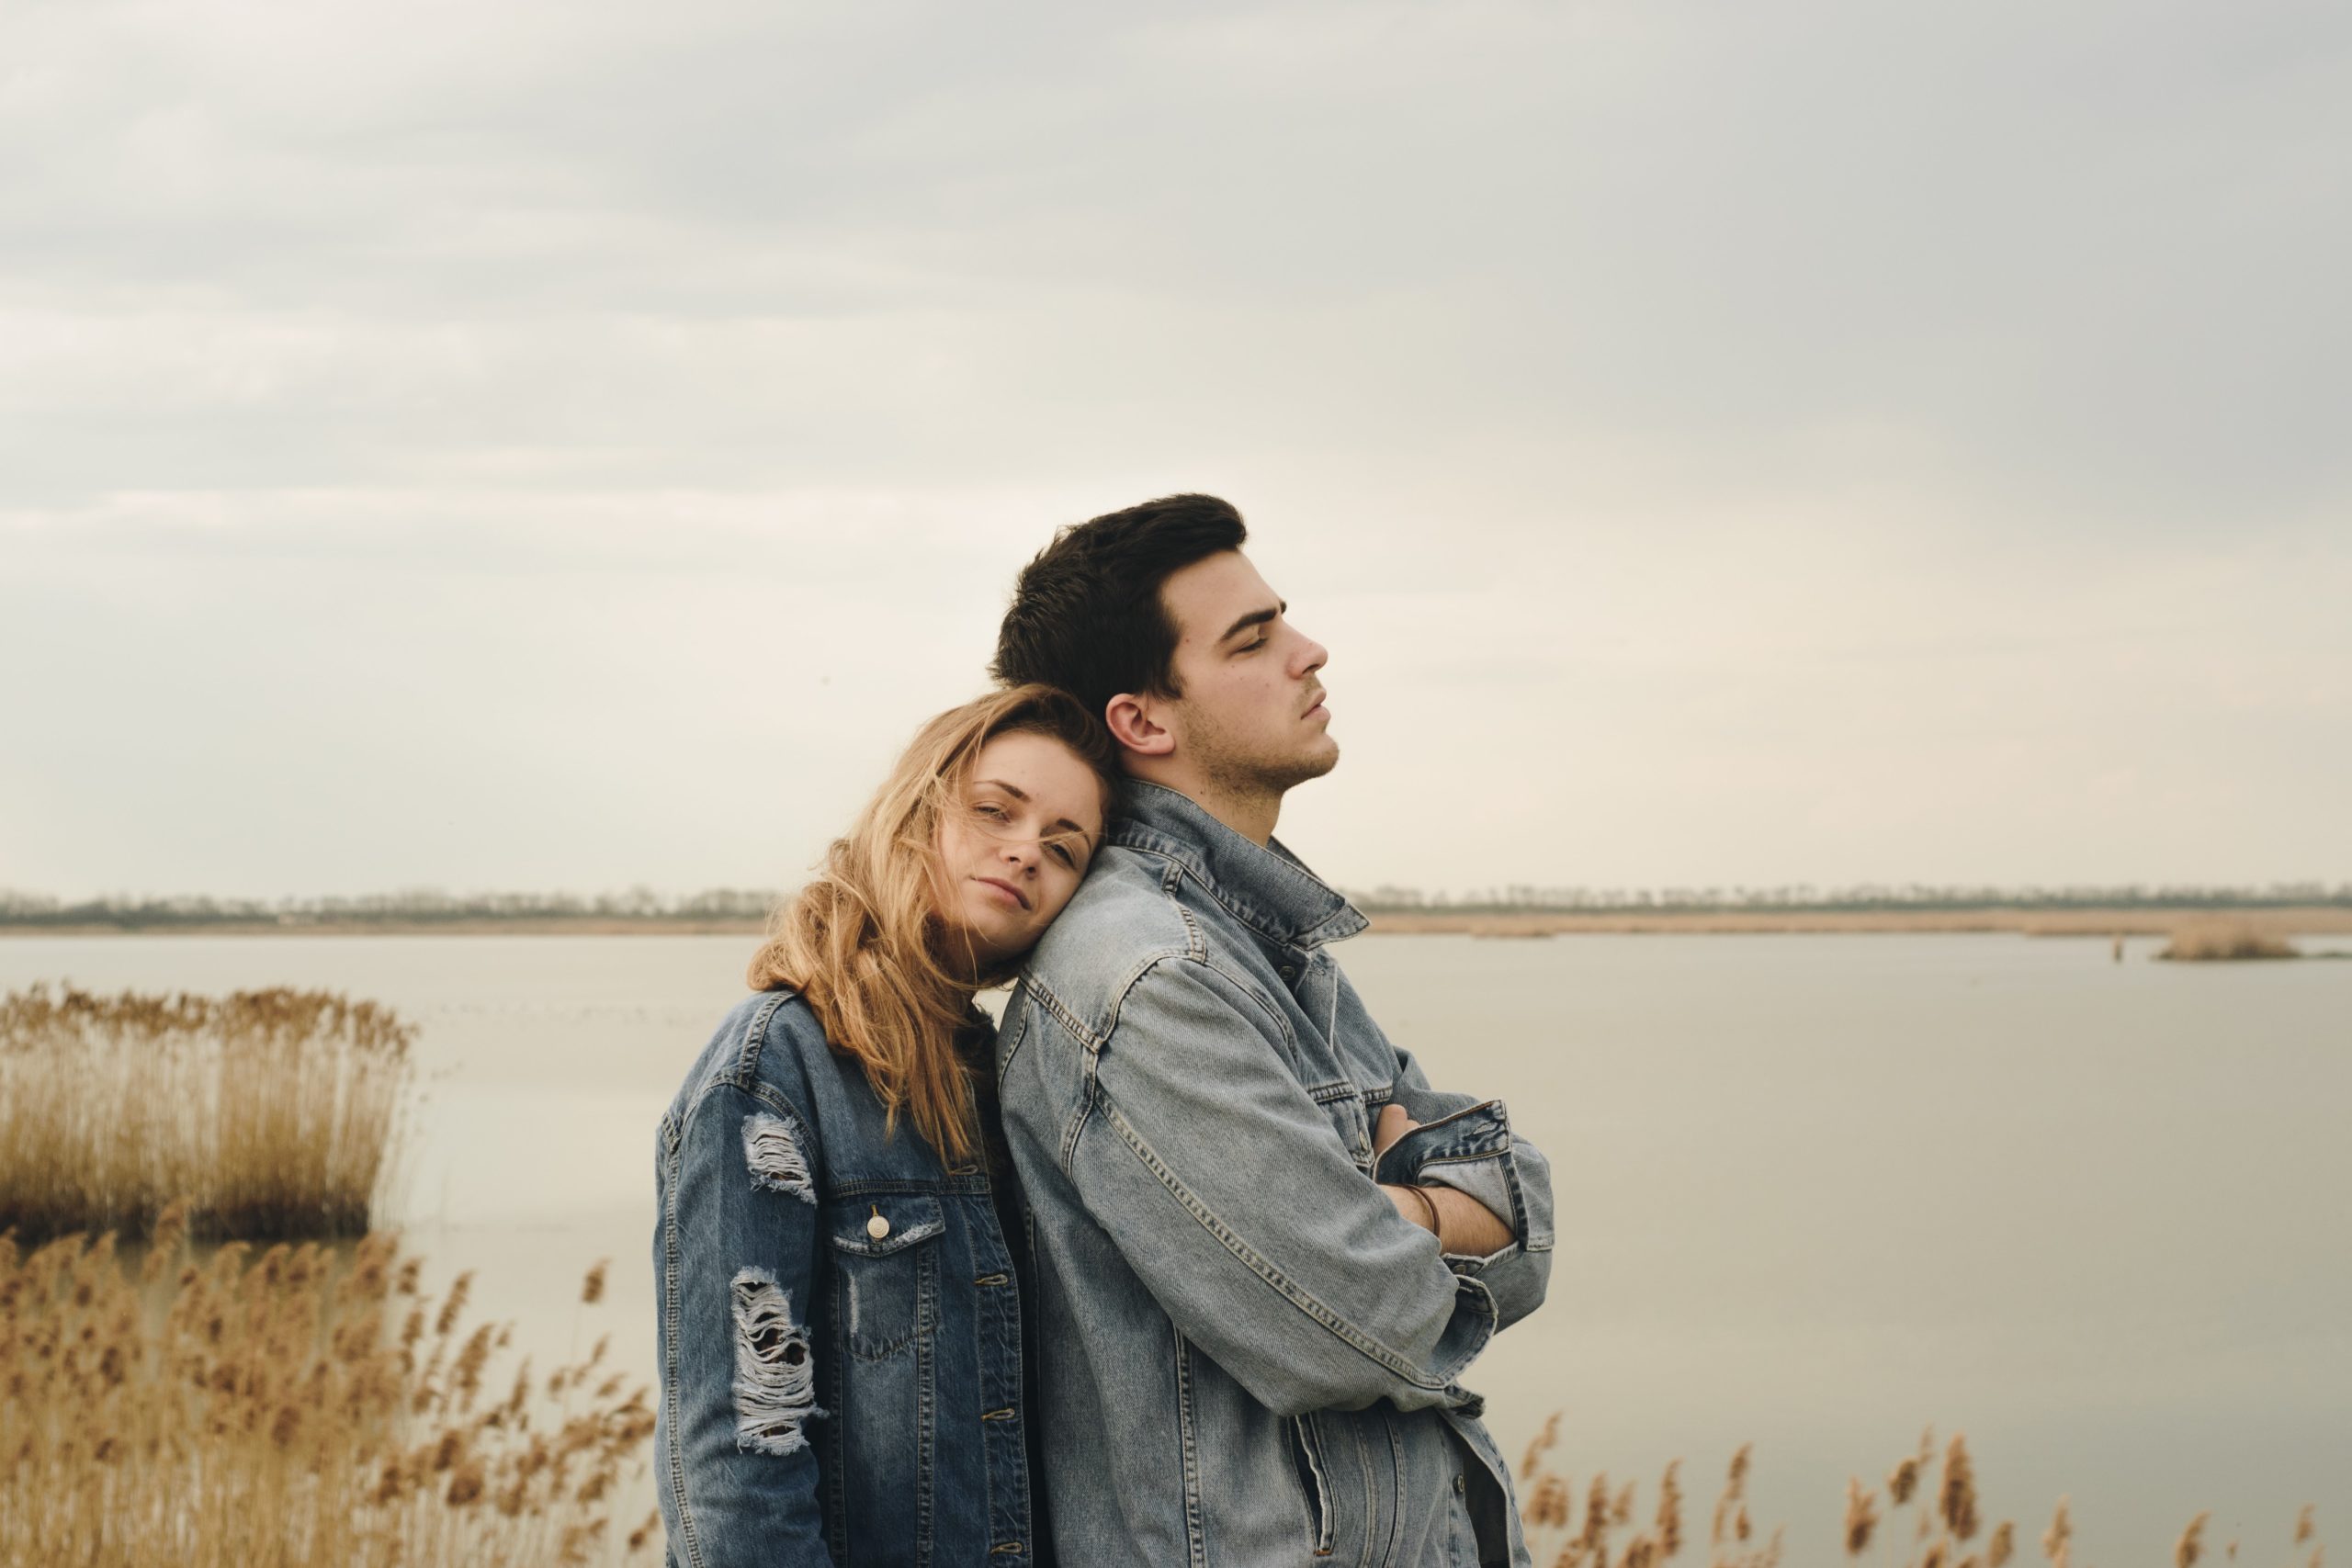 10 Reasons Why Couples Stop Having Sex milan popovic FHvpa4 Fpu8 unsplash scaled